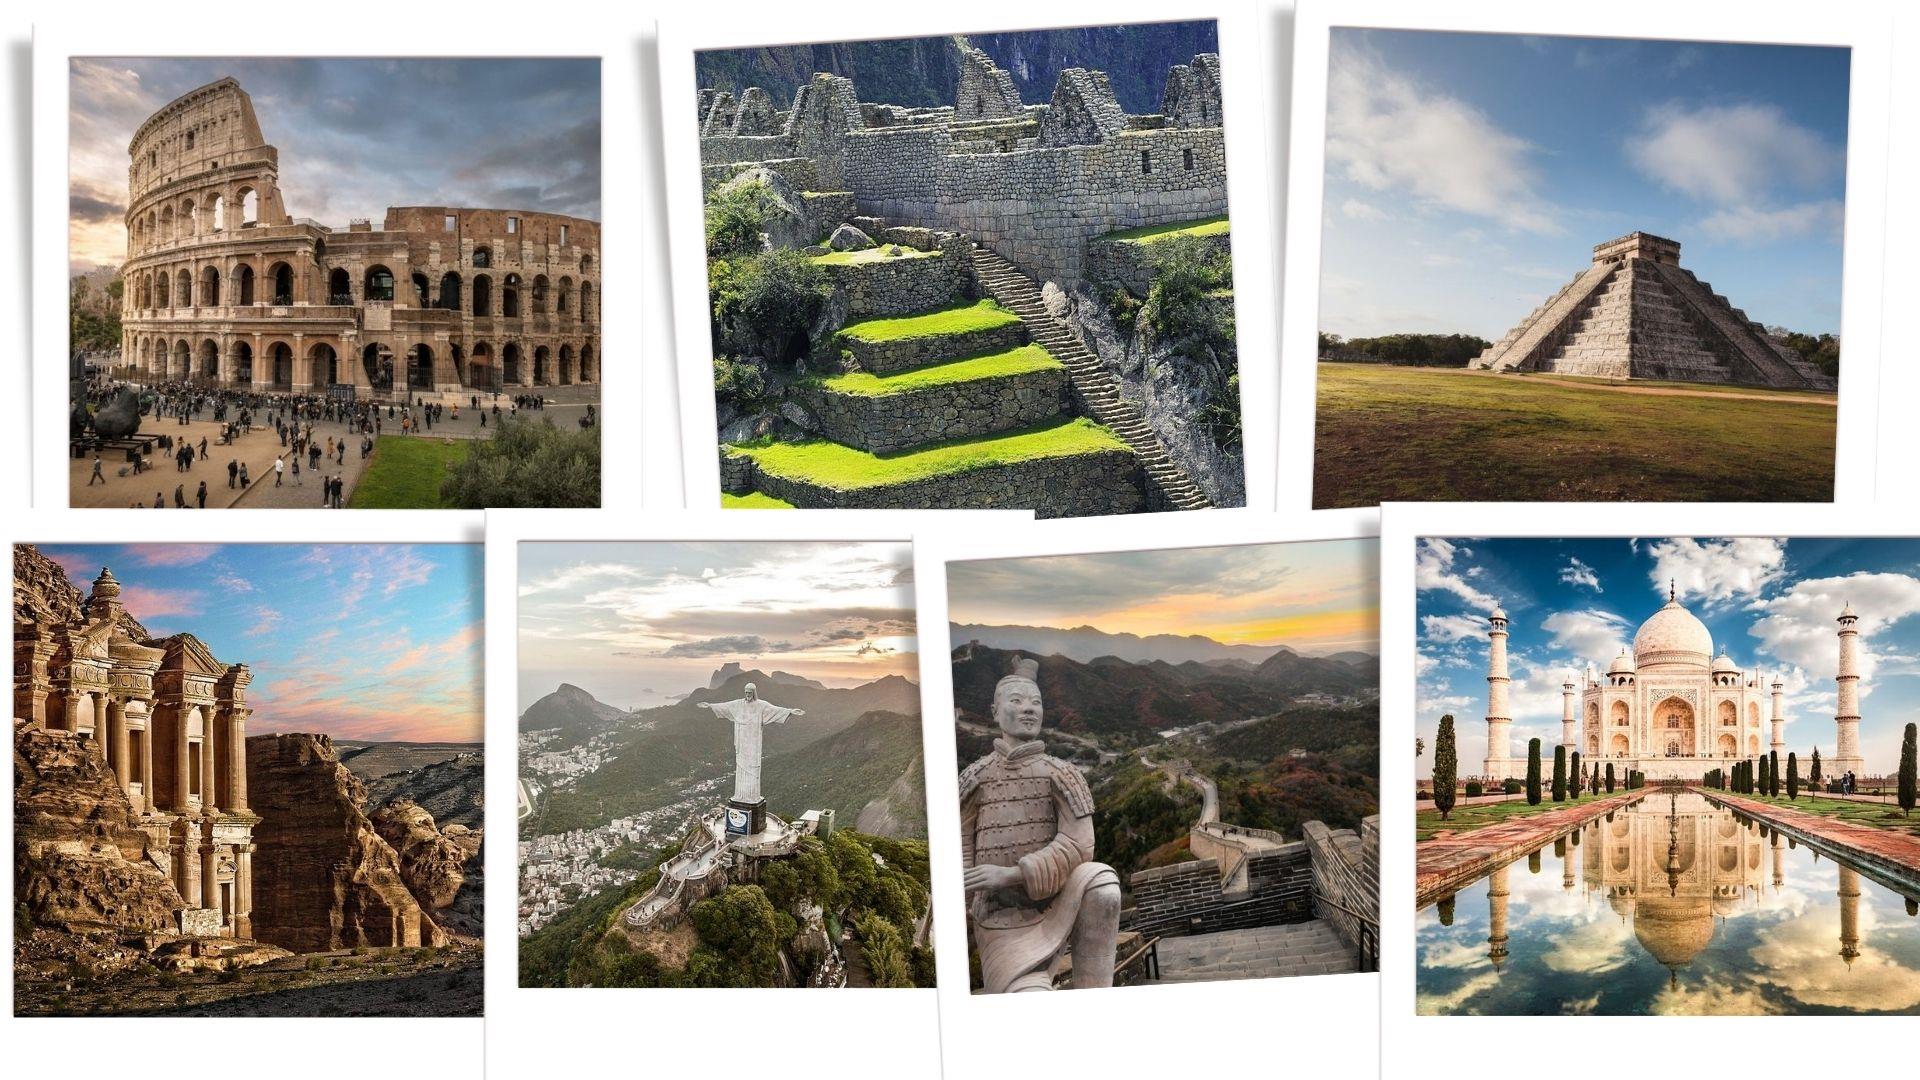 7 wonders of the ancient world collage